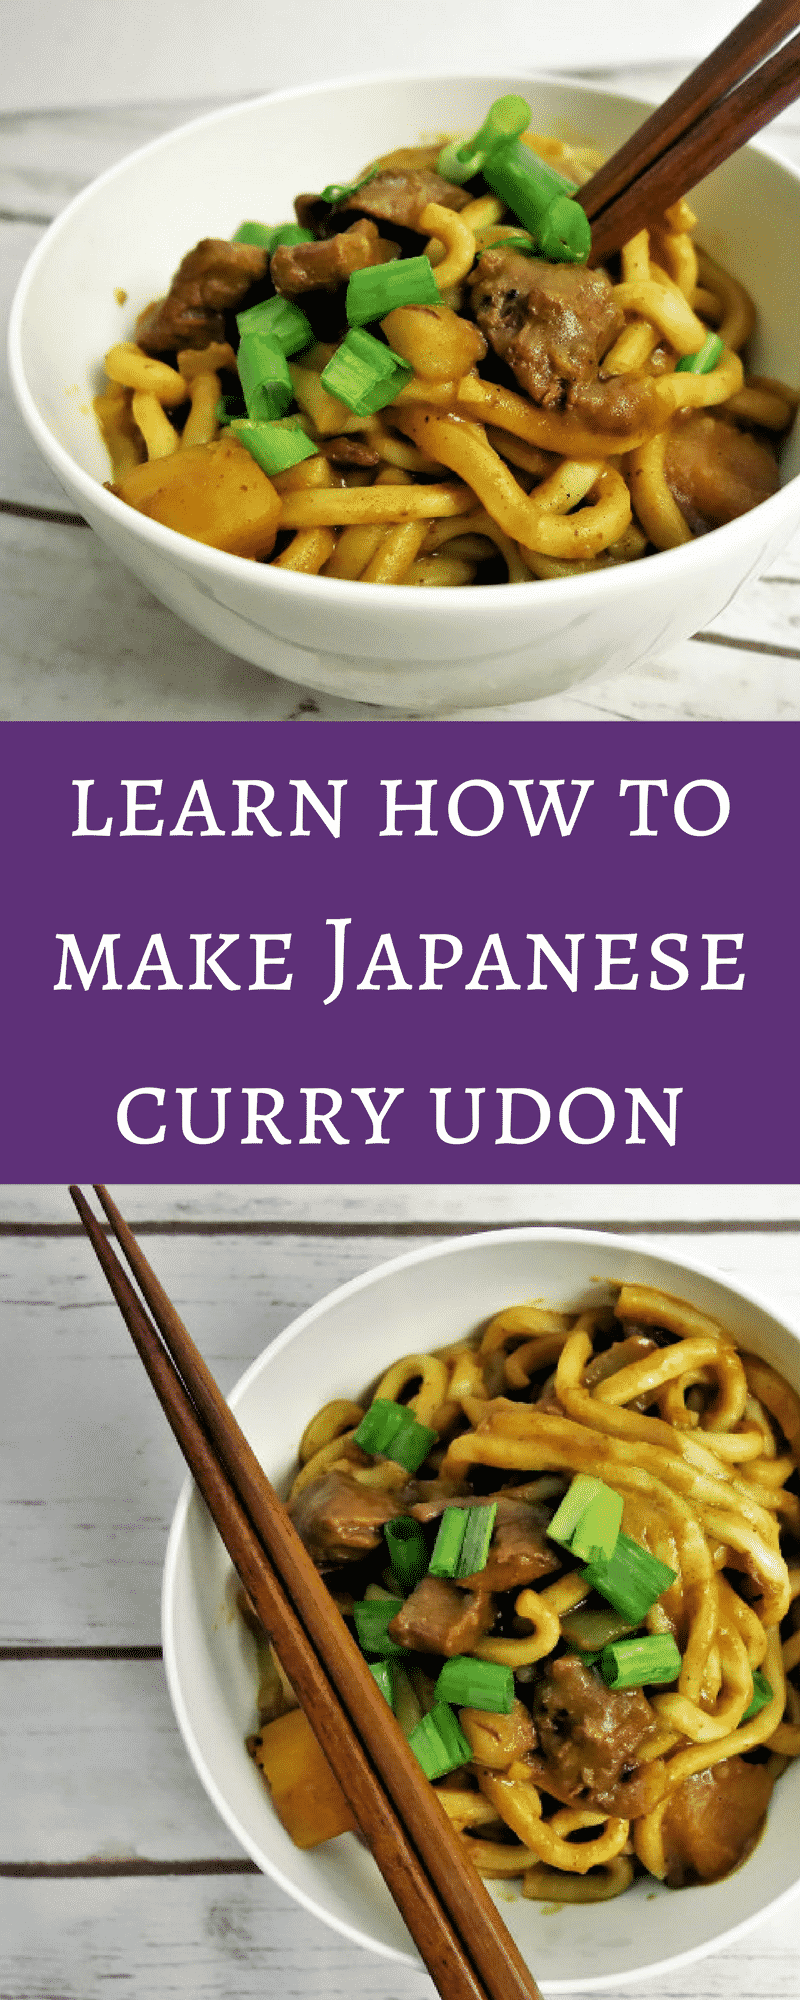 Japanese Beef Curry Udon (Kare Udon) Made Simple - Went Here 8 This